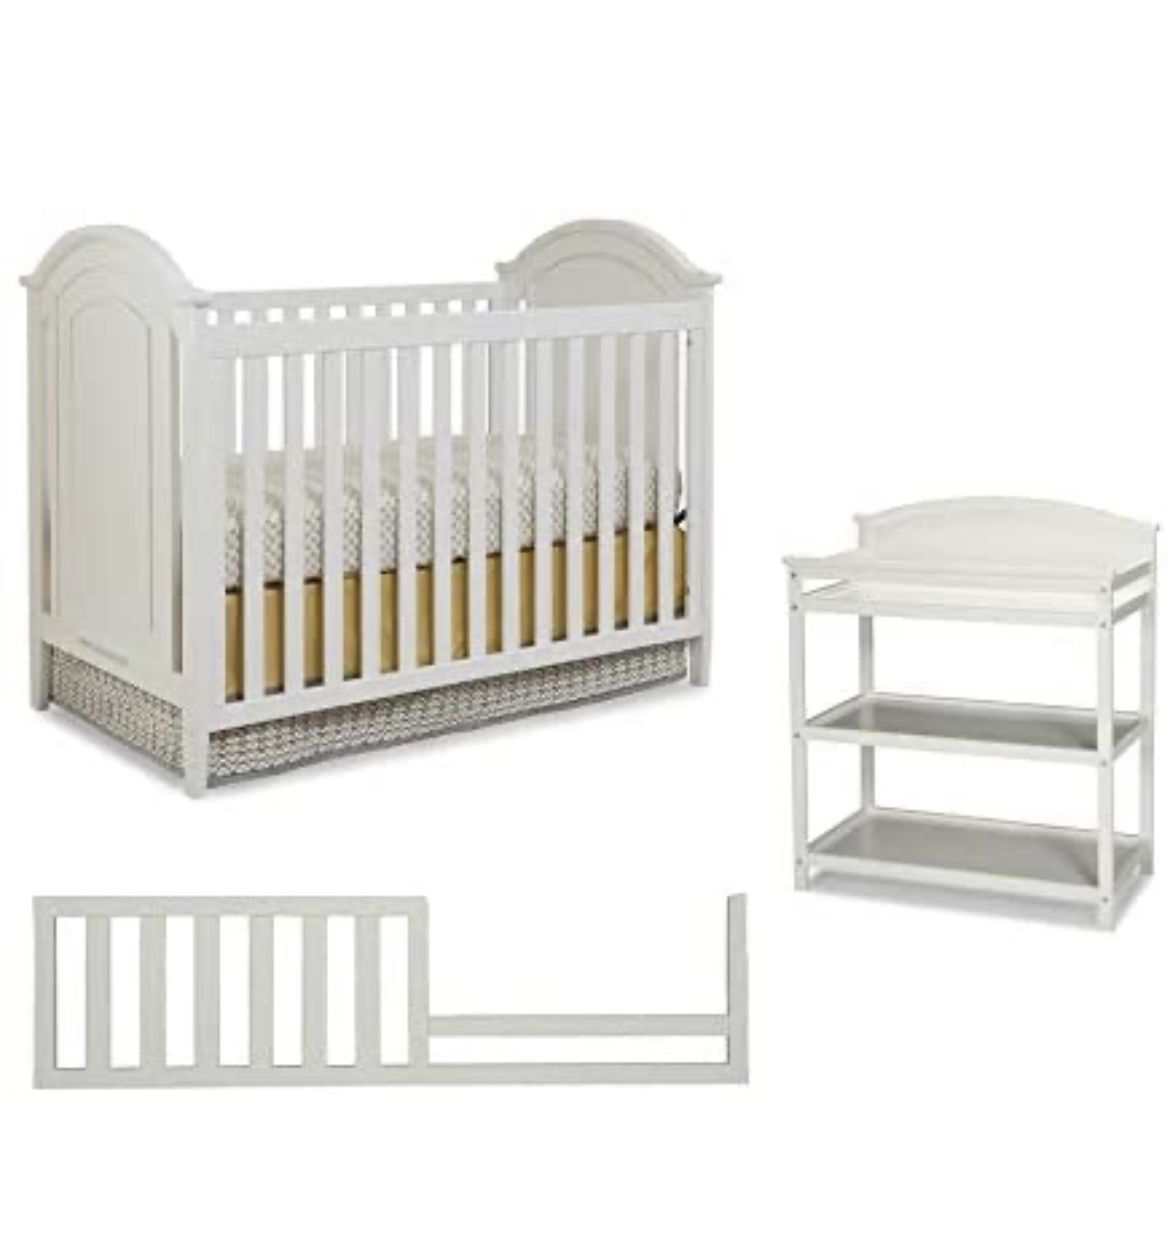 Imagio baby Convertible Crib W/changing Table (used)